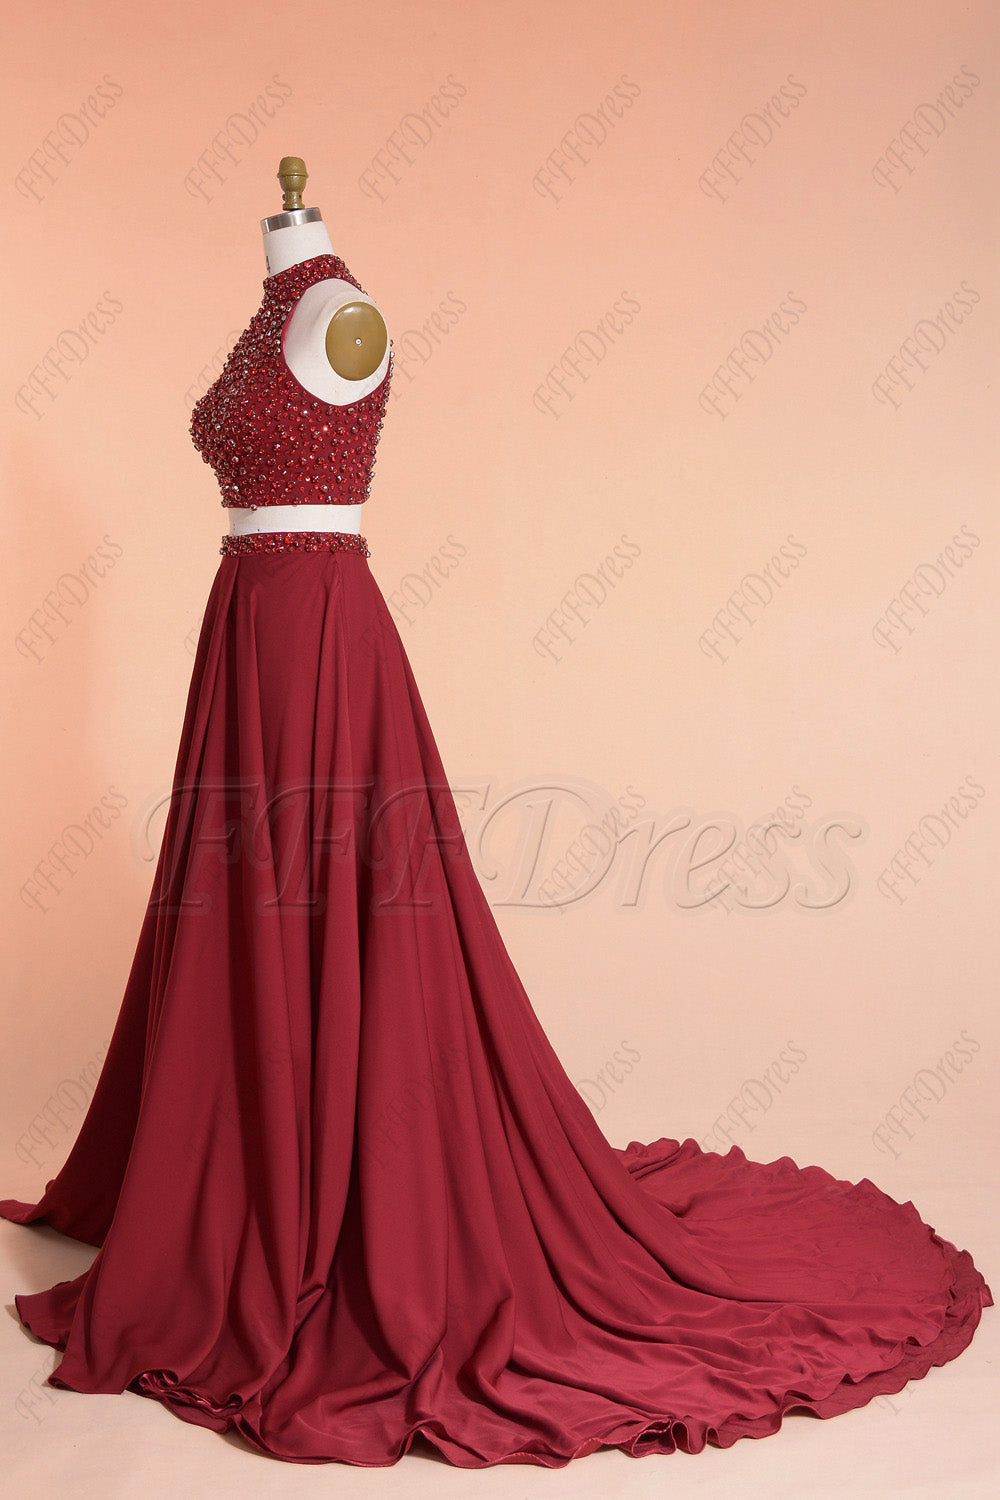 Beaded burgundy two piece long prom dresses with slit